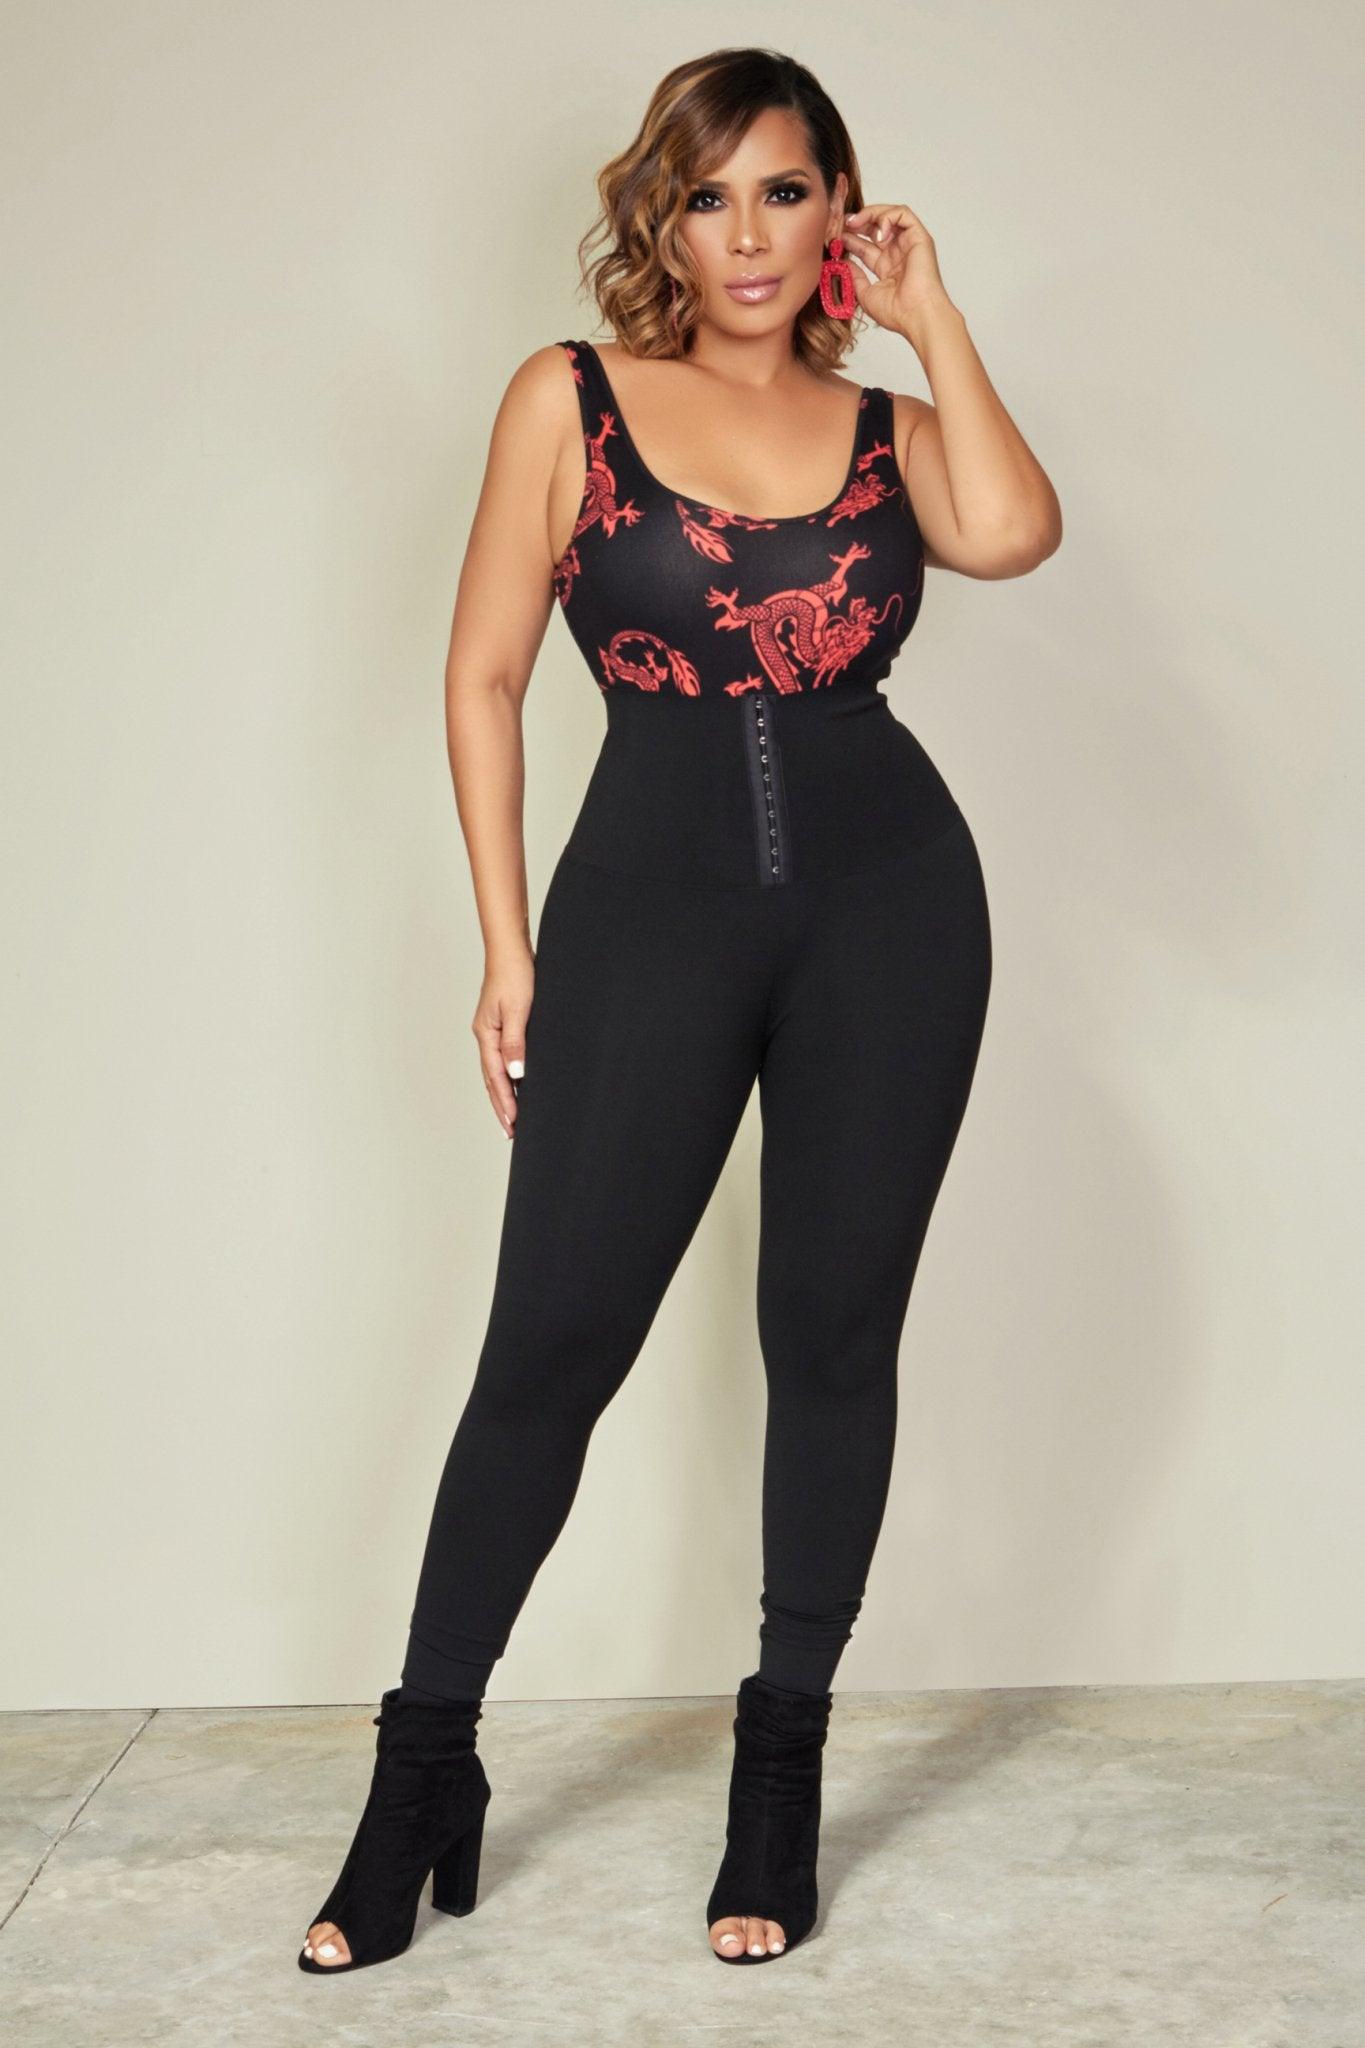 High Waisted Wideband Pants - MY SEXY STYLES